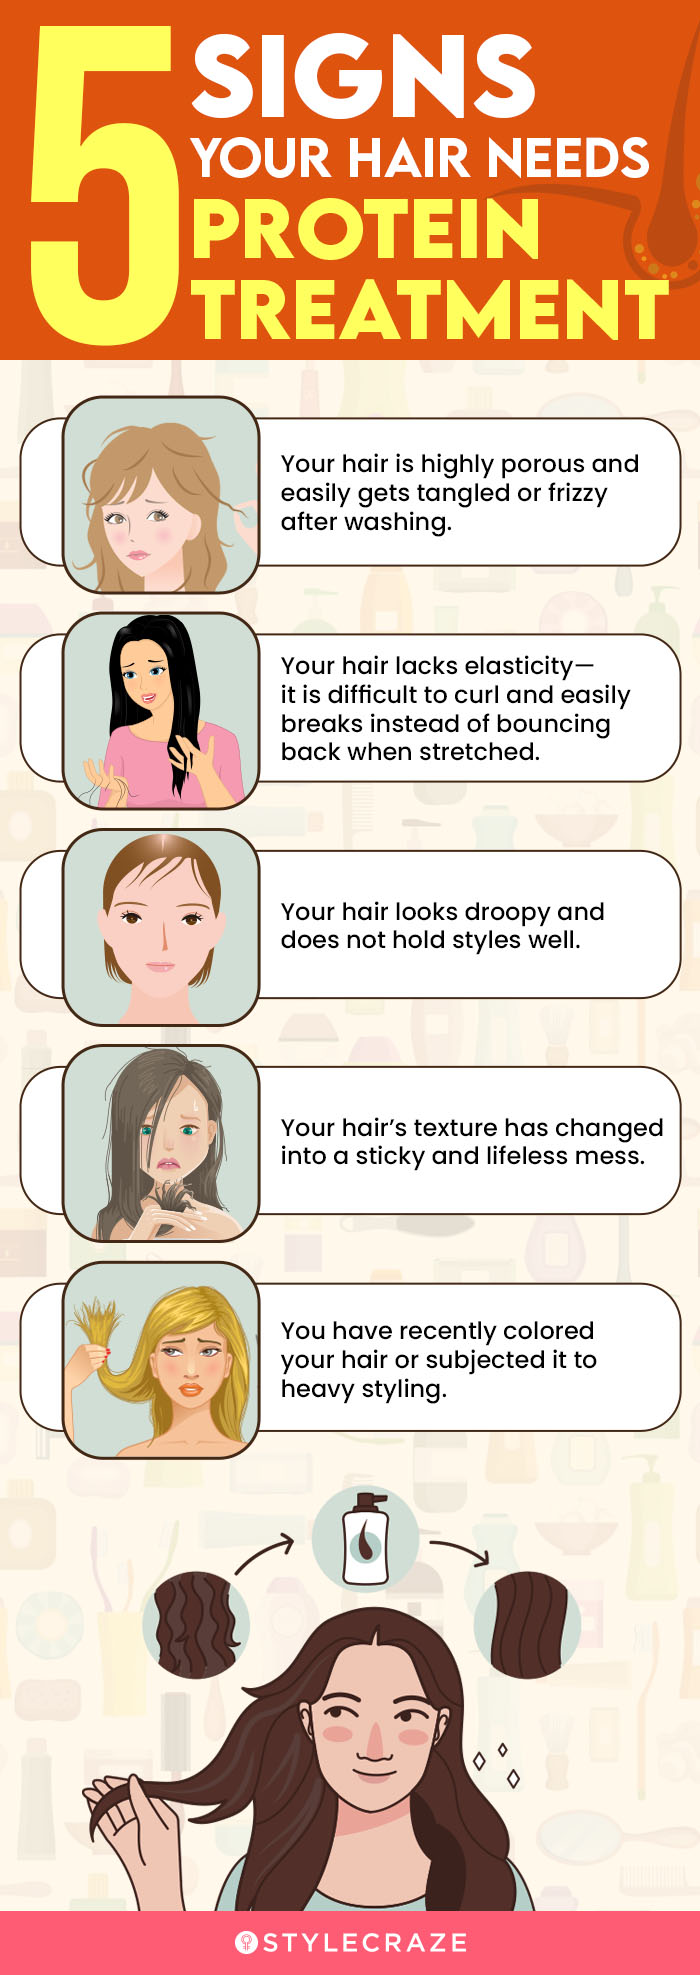 5 signs your hair needs protein treatment [infographic]